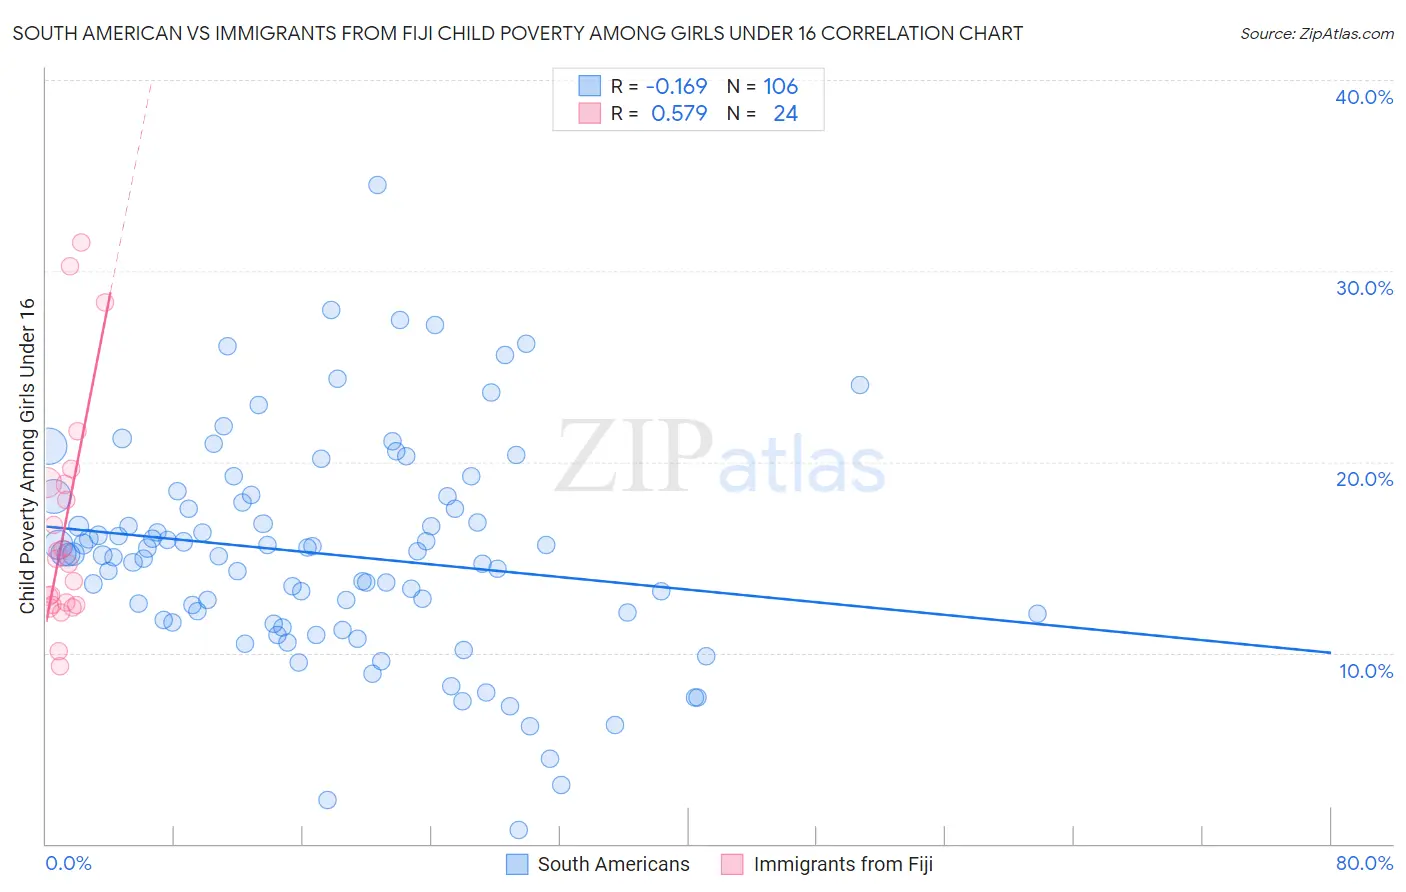 South American vs Immigrants from Fiji Child Poverty Among Girls Under 16